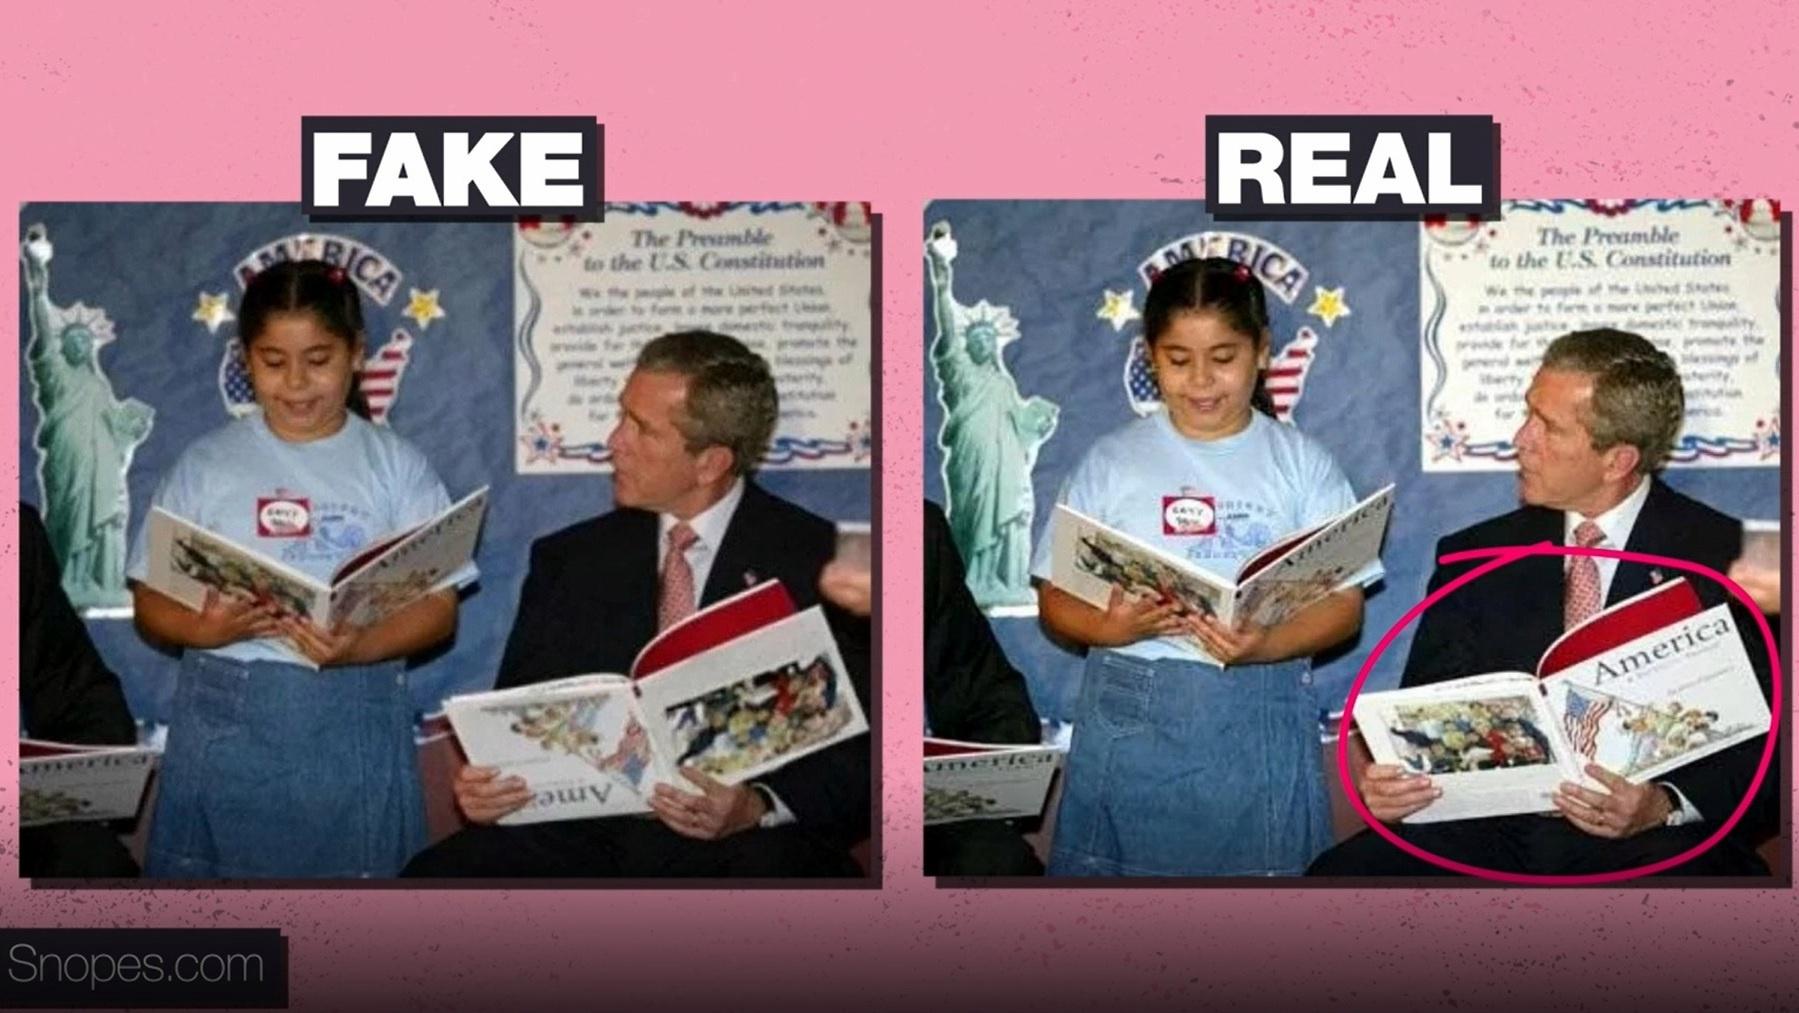 Two images are shown; the fake image on the left shows President Bush beside a girl reading. President Bush is holding an upside-down book. The actual image on the right shows President Bush holding the book upright. 